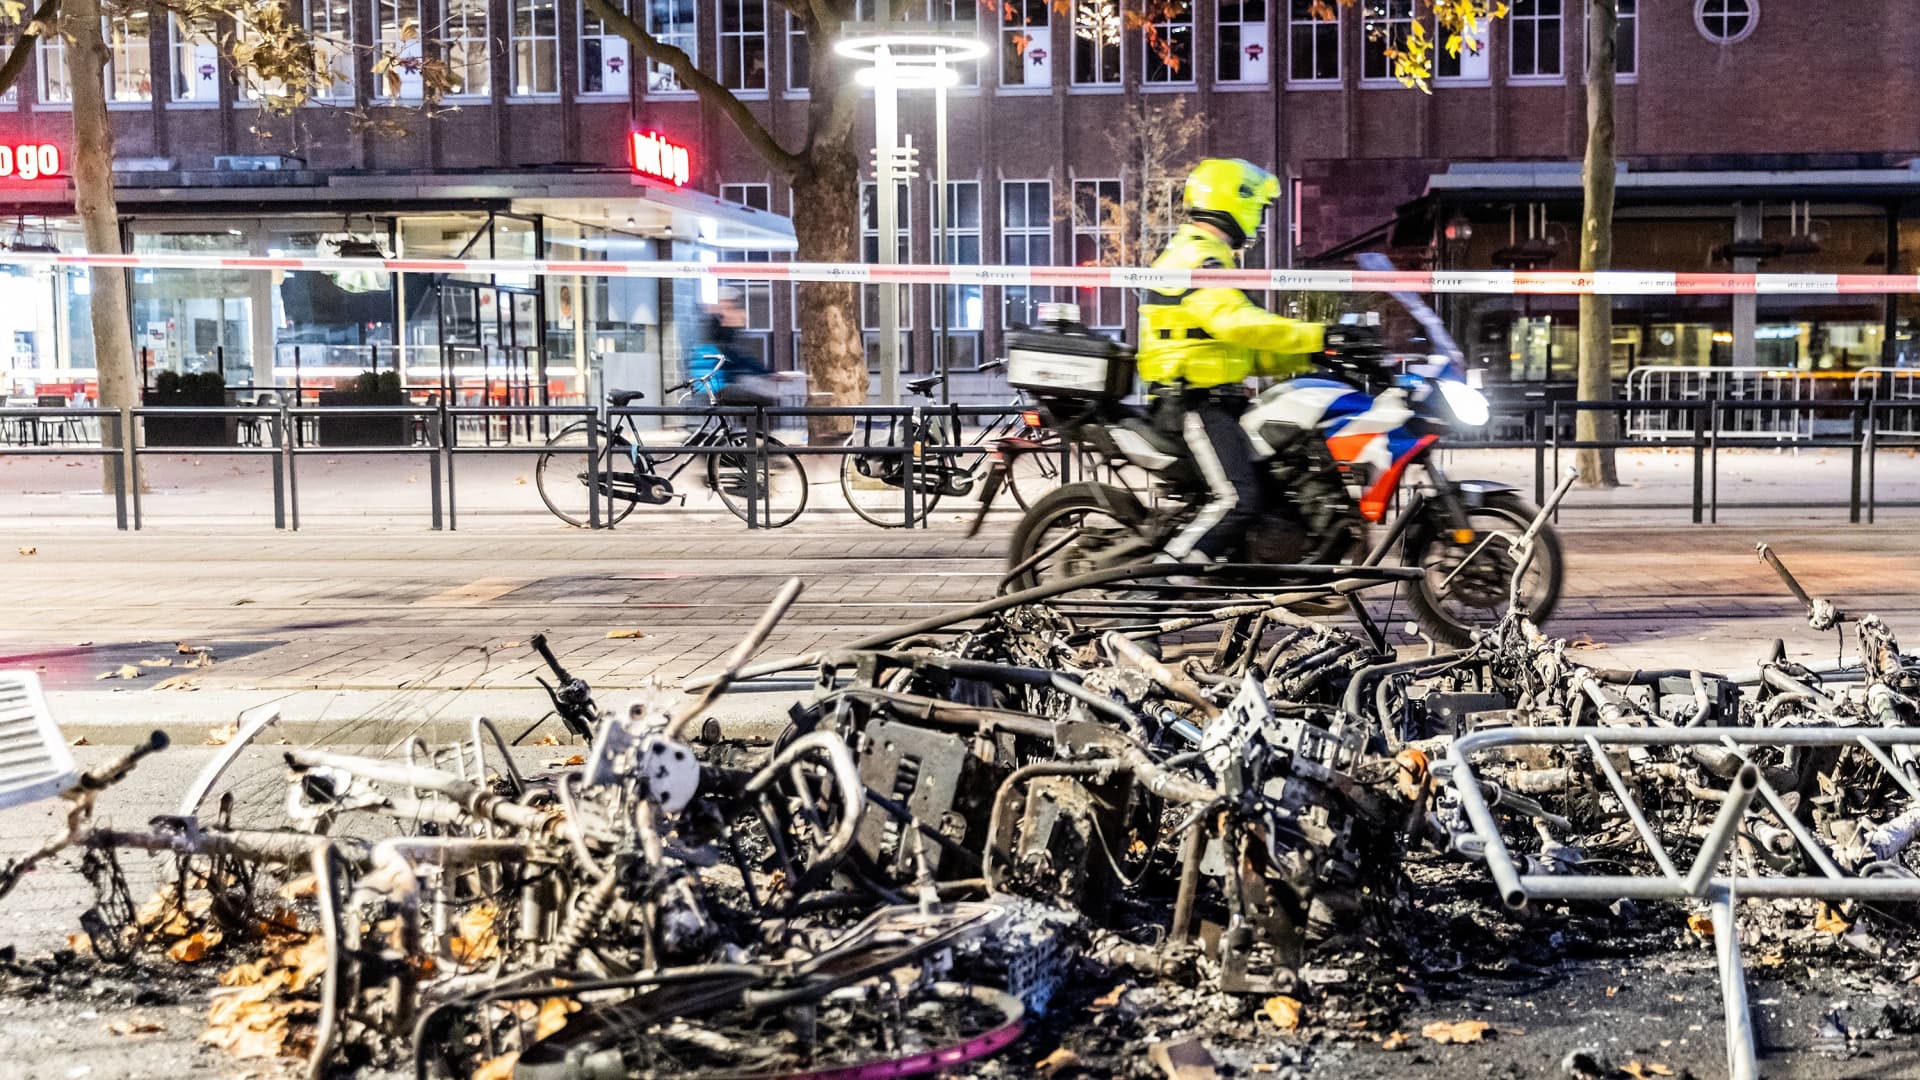 This photograph taken on November 20, 2021 shows burned bikes after a protest against the partial lockdown and against the 2G government policy in Rotterdam.